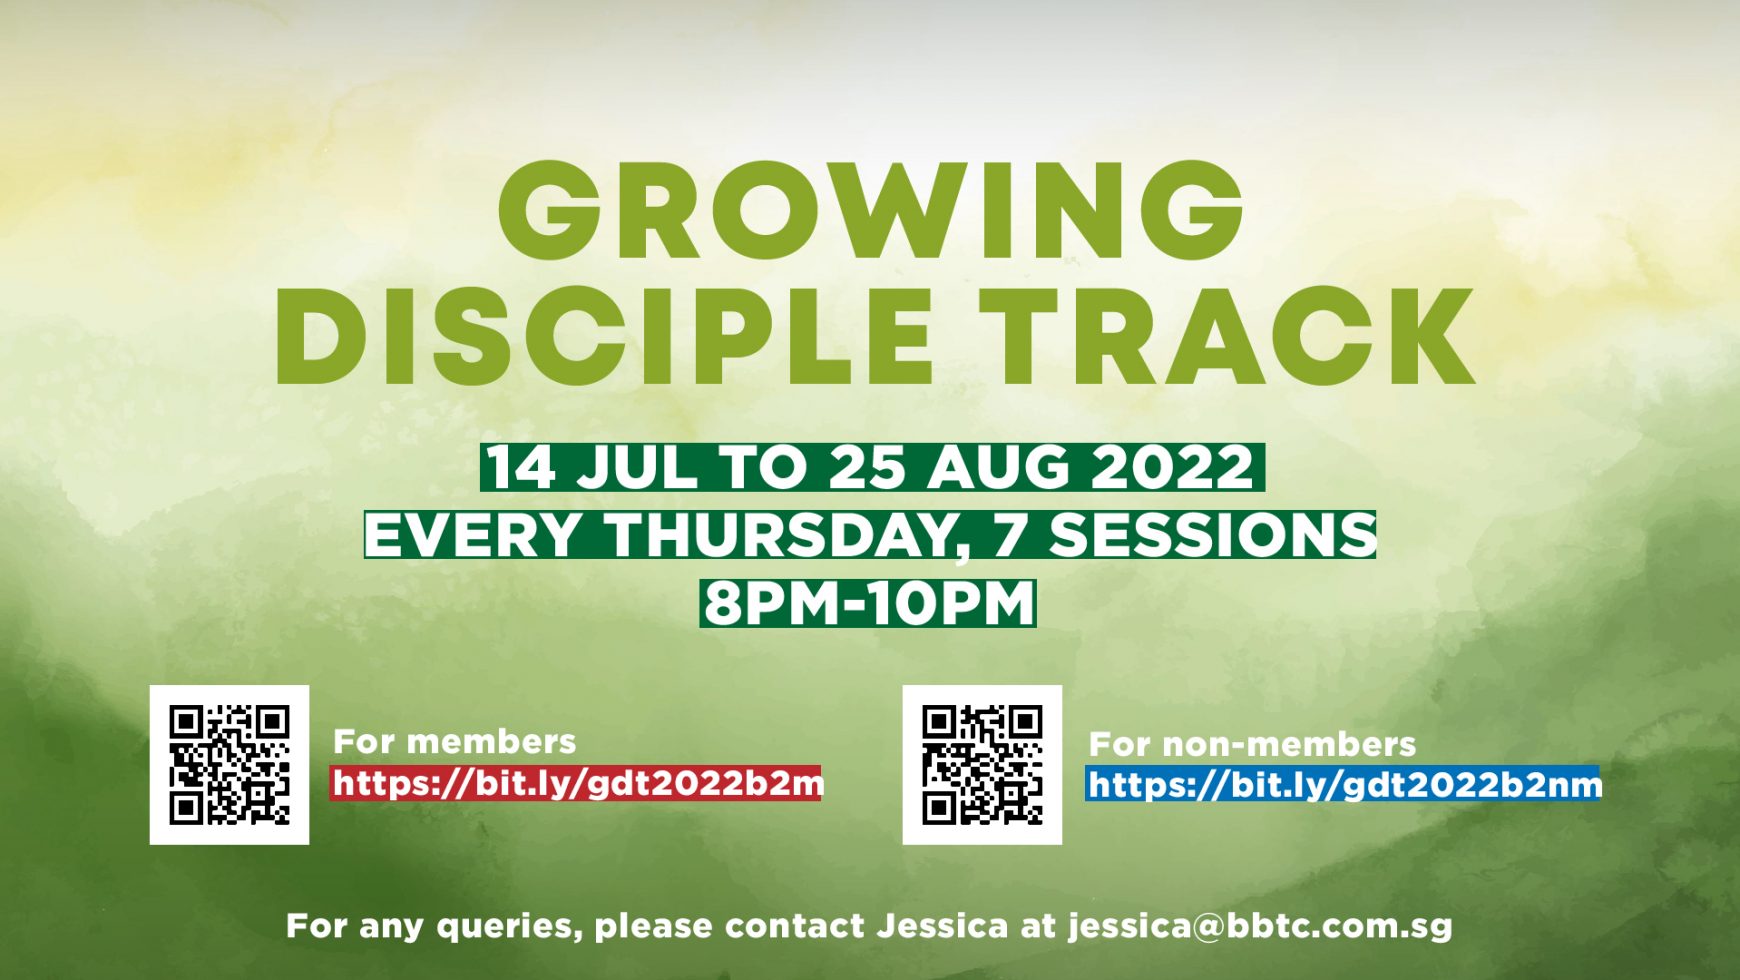 GROWING DISCIPLE TRACK (GDT) – Batch 2